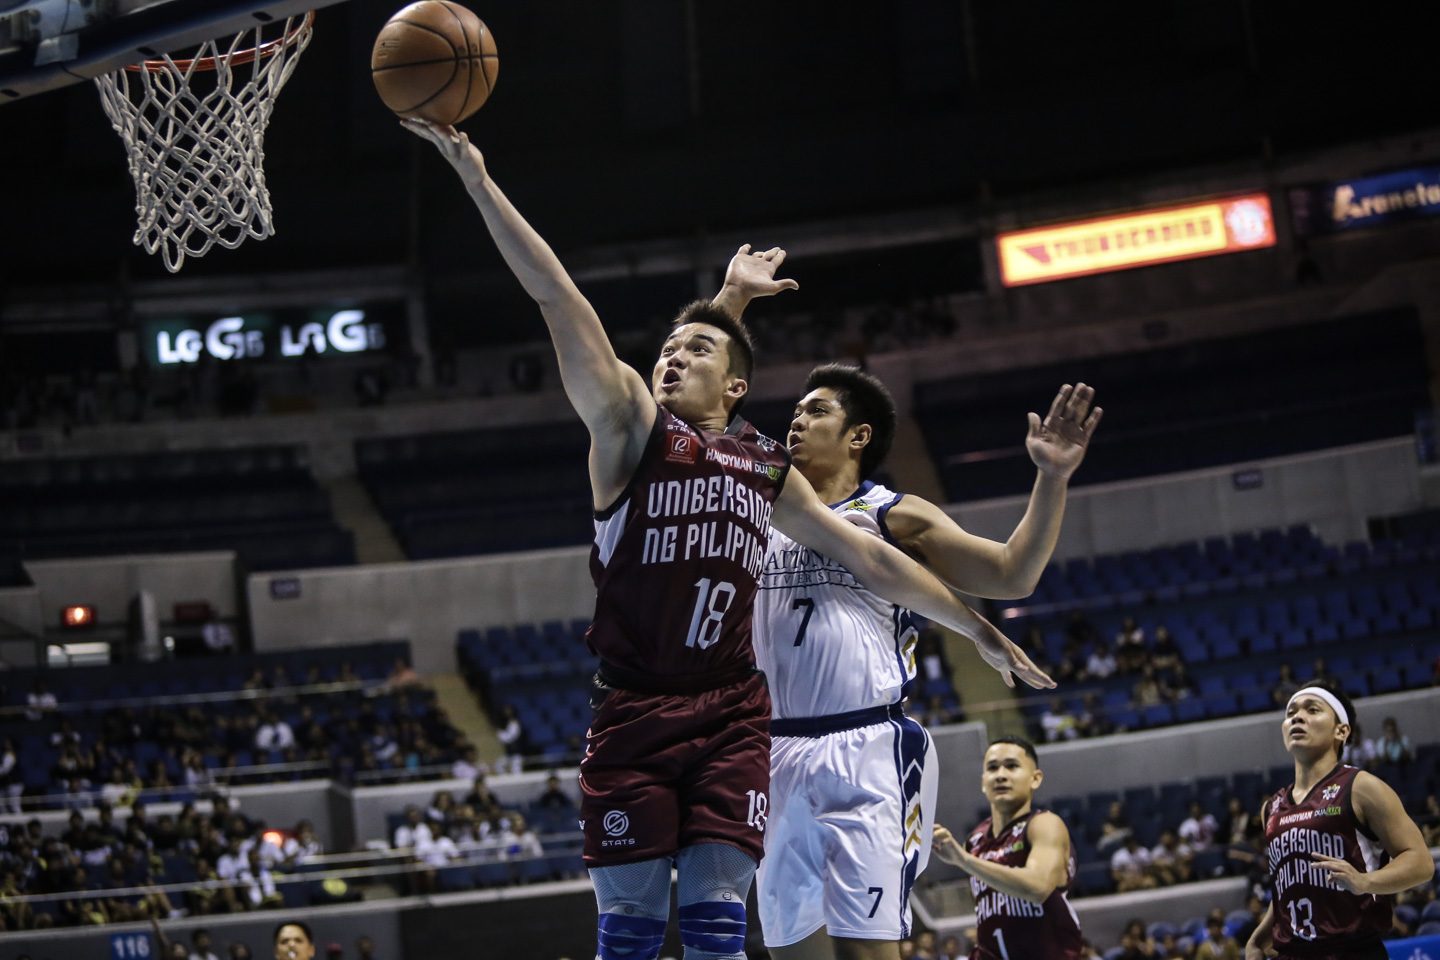 Fighting Maroons eliminate Bulldogs from final 4 contention